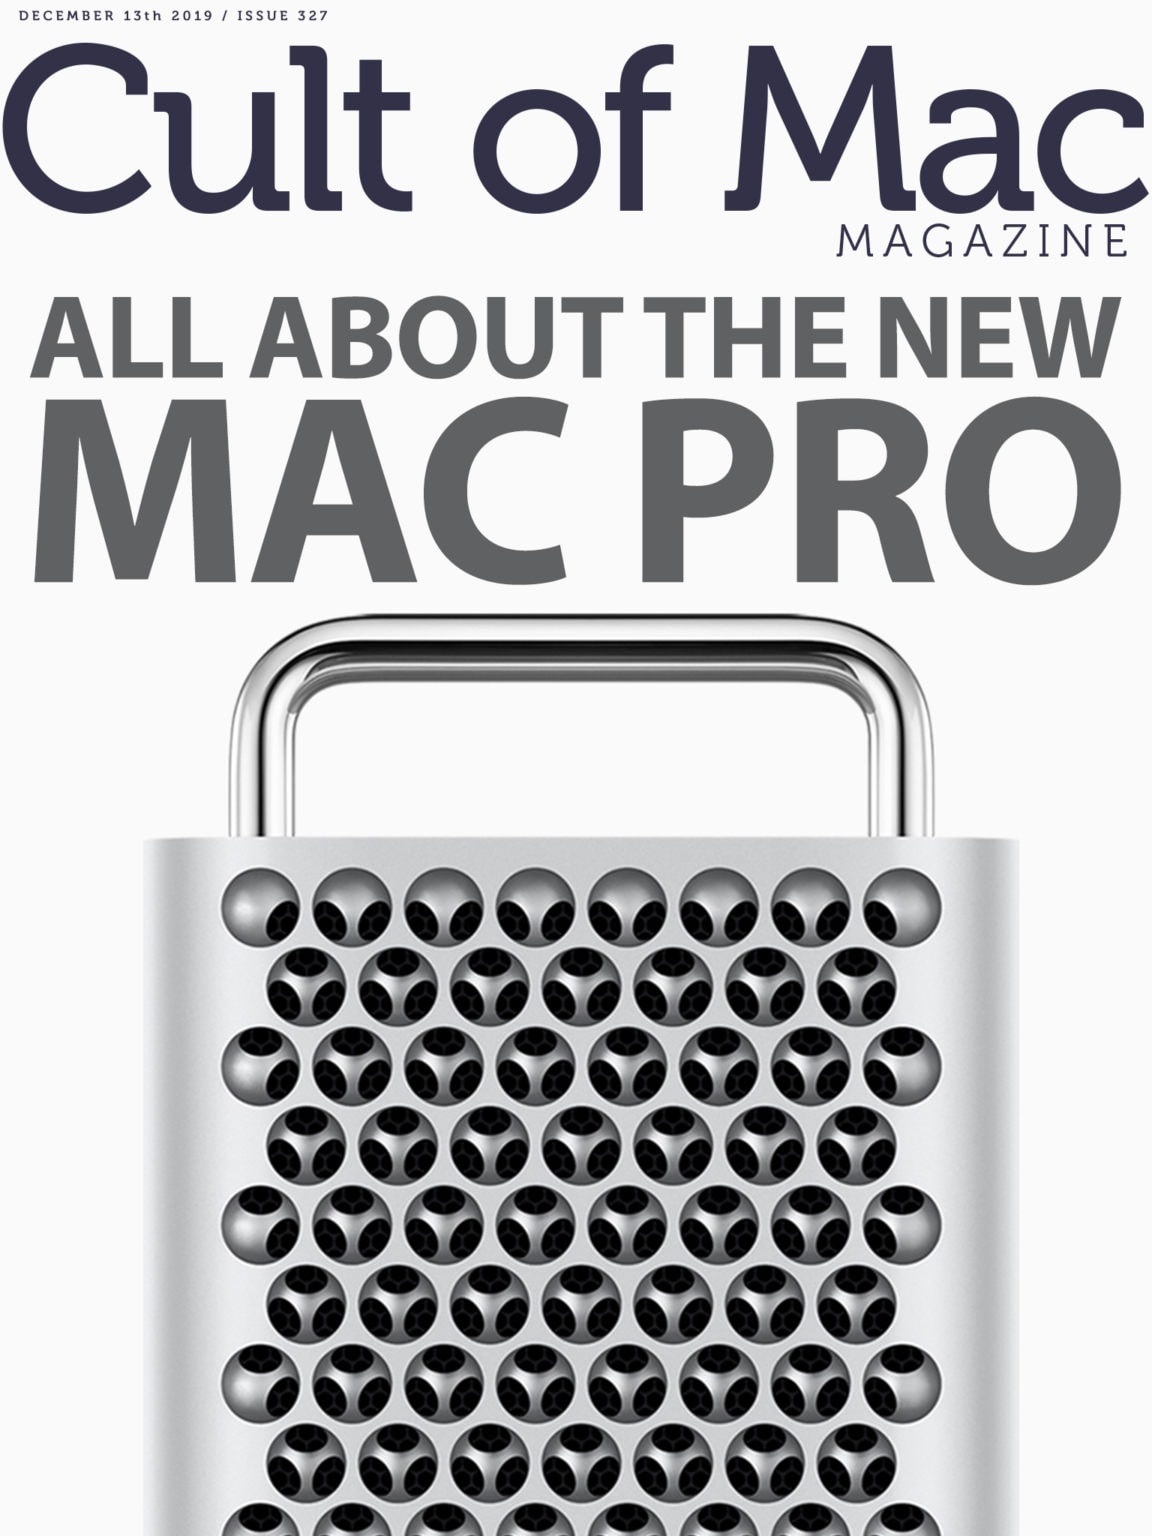 It's a Mac. For pros? What else is there to say? (Plenty, actually.)